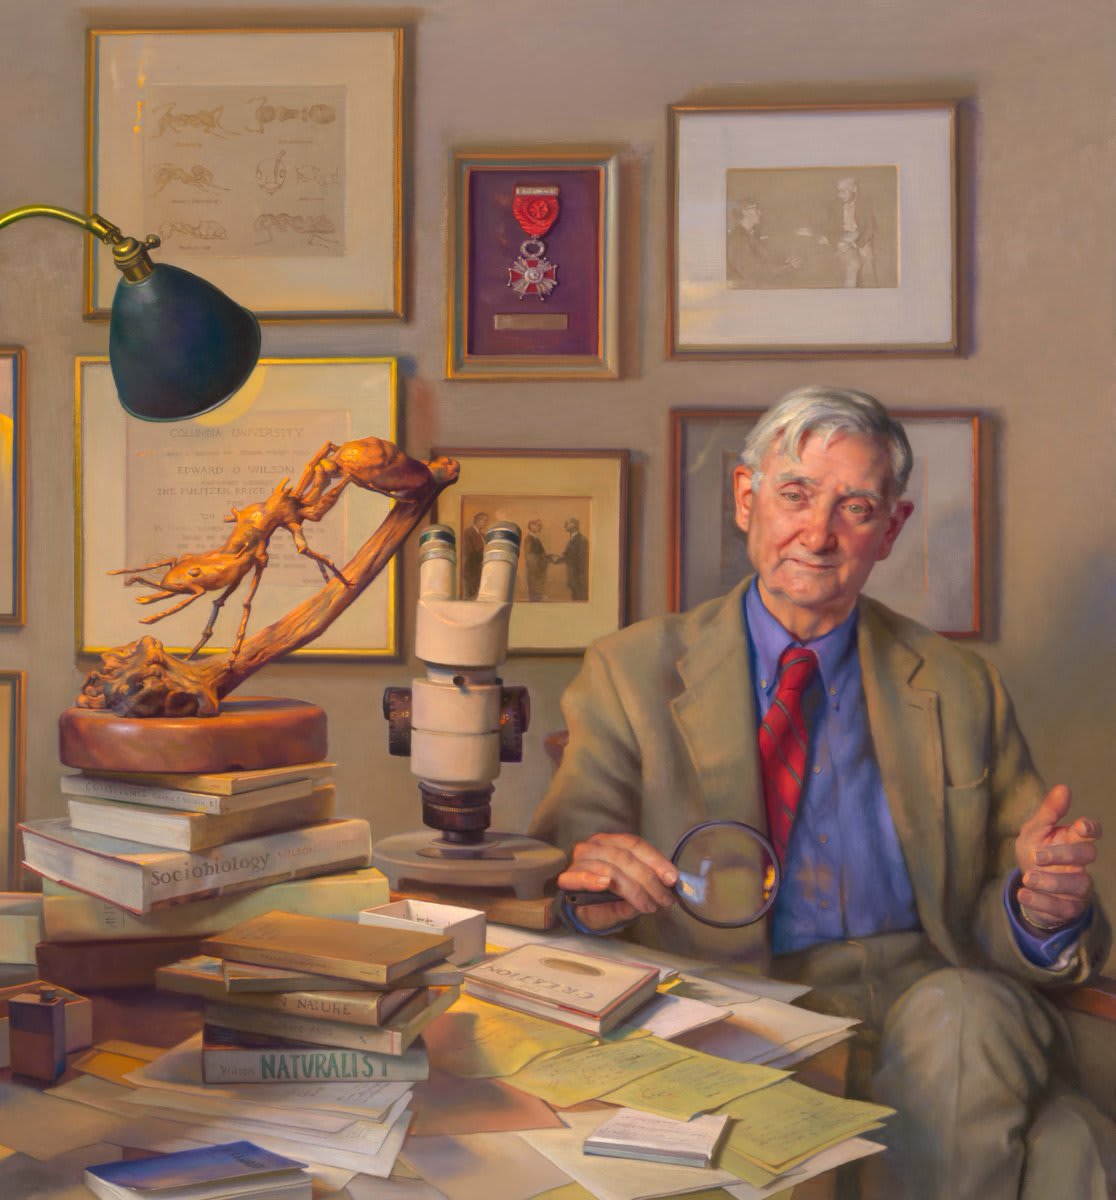 We remember biologist Edward O. Wilson who passed away yesterday at the of age 92. Wilson, a two-time winner of the Pulitzer Prize for general nonfiction, was a leading force in the biodiversity movement since the 1980s. 🎨: Nelson Shanks, 2008 © Estate of Nelson Shanks